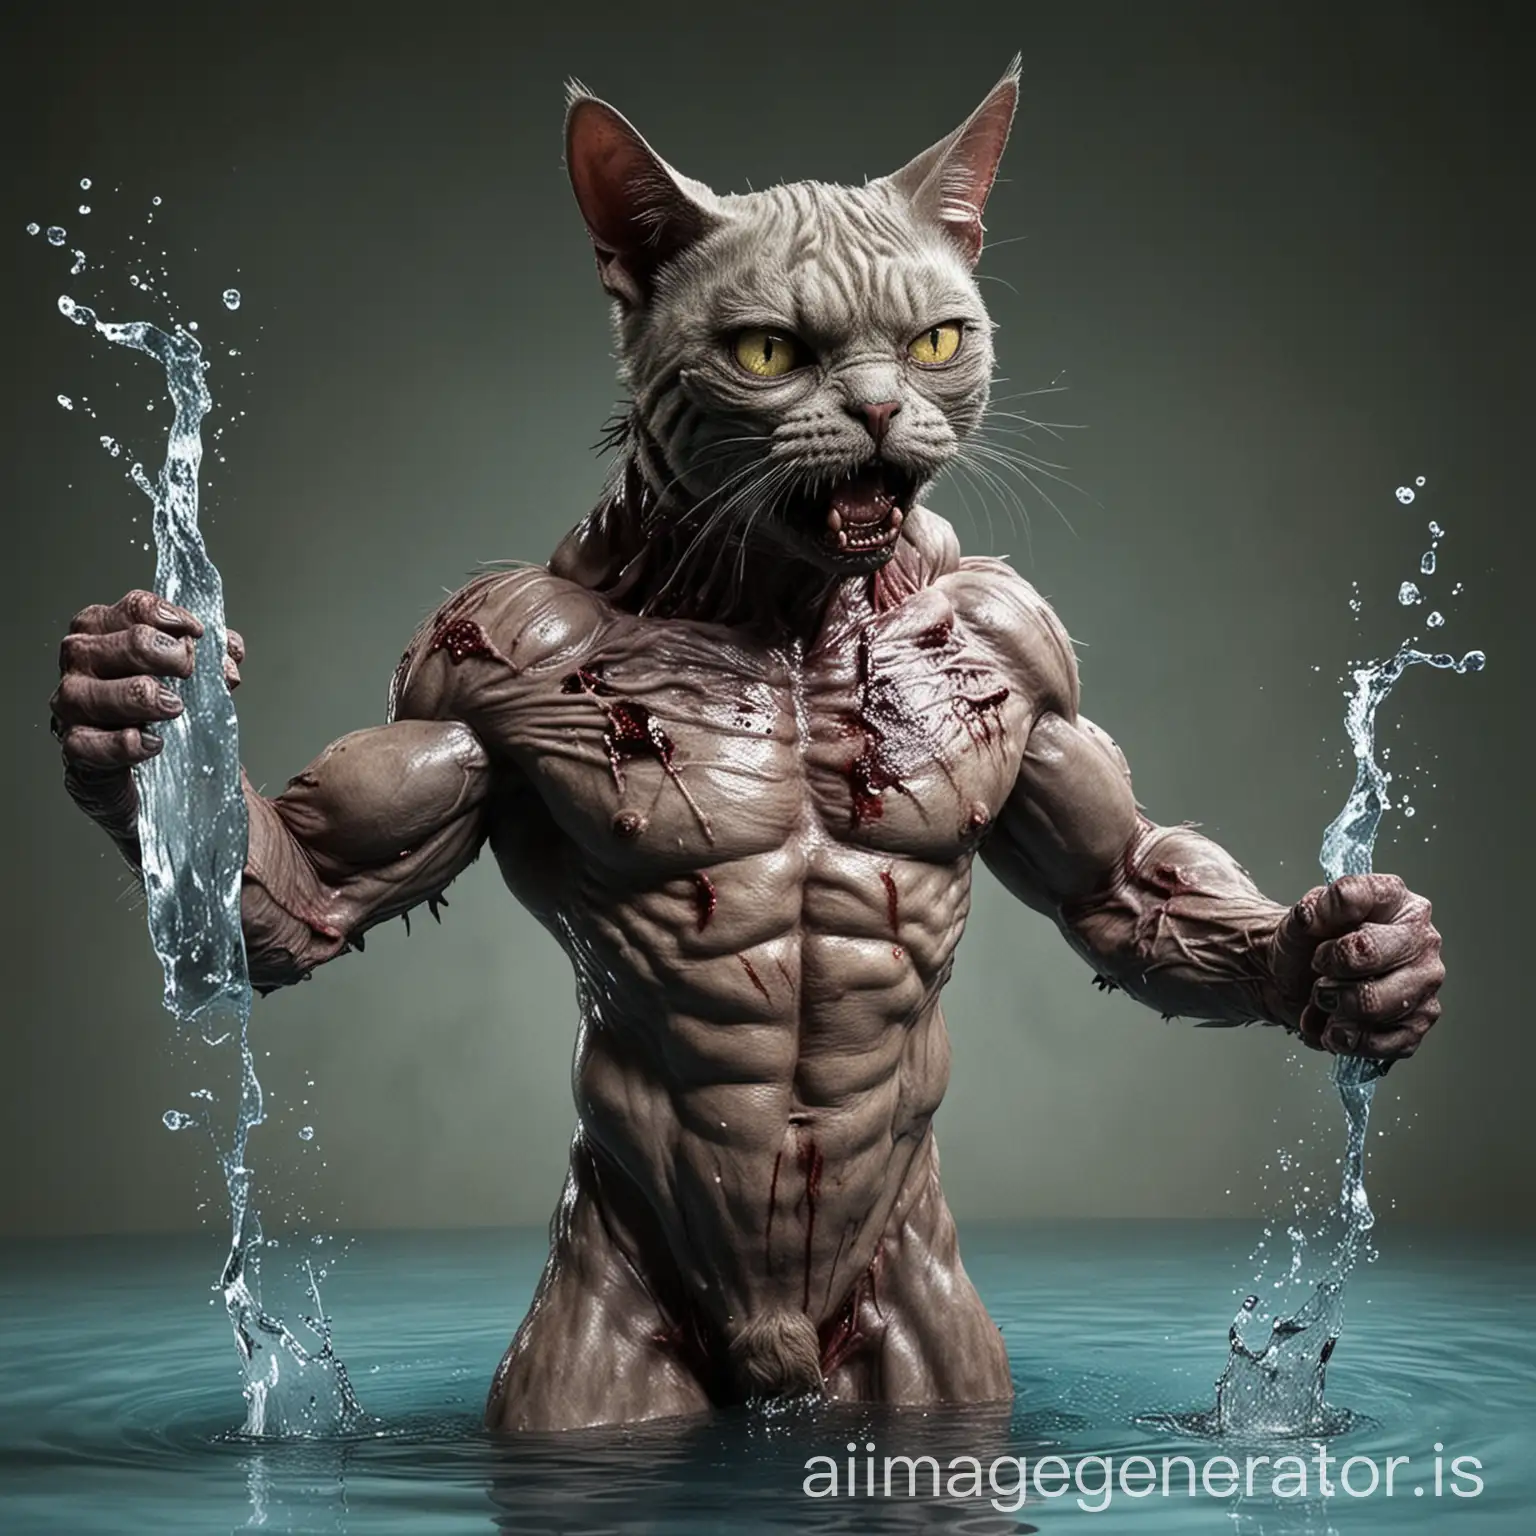 Muscular-Cat-Zombie-Emerging-from-Water